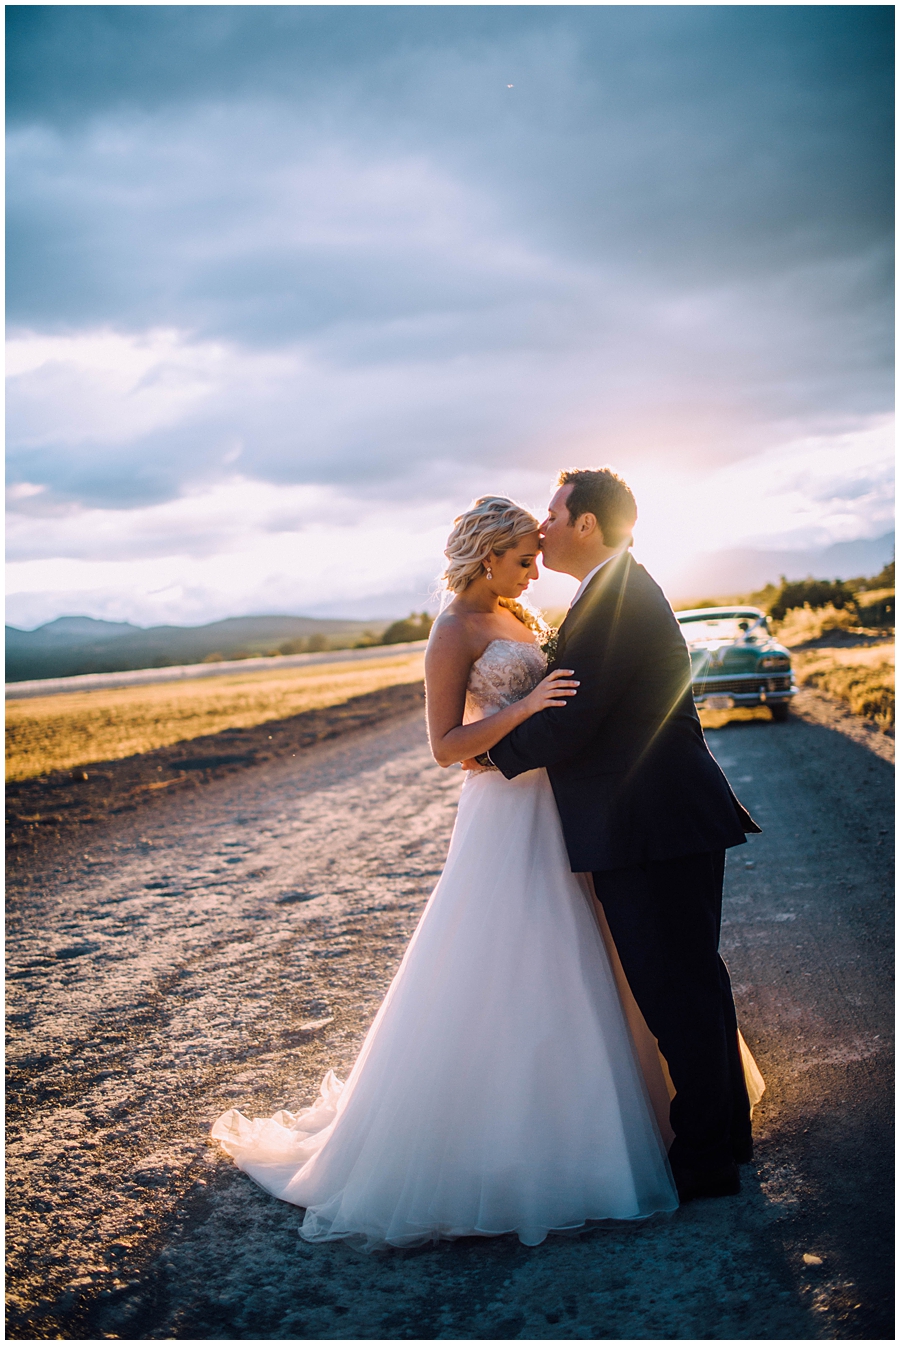 Ronel Kruger Cape Town Wedding and Lifestyle Photographer_4929.jpg